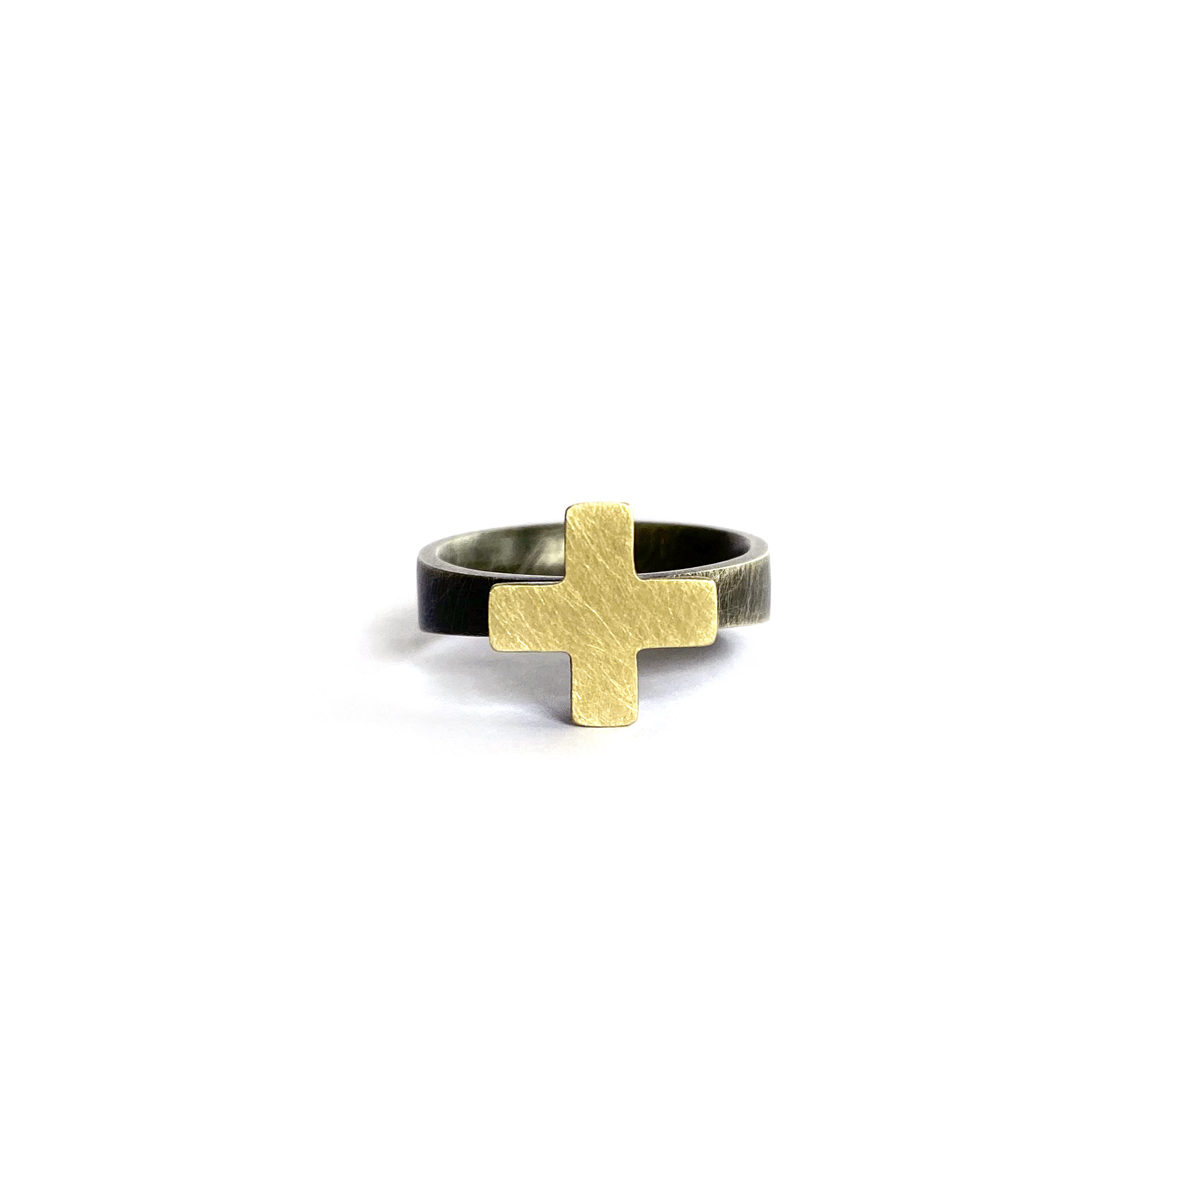 Axis Mundi Ring, sterling silver, 18ct gold, 2020, Kate Alterio